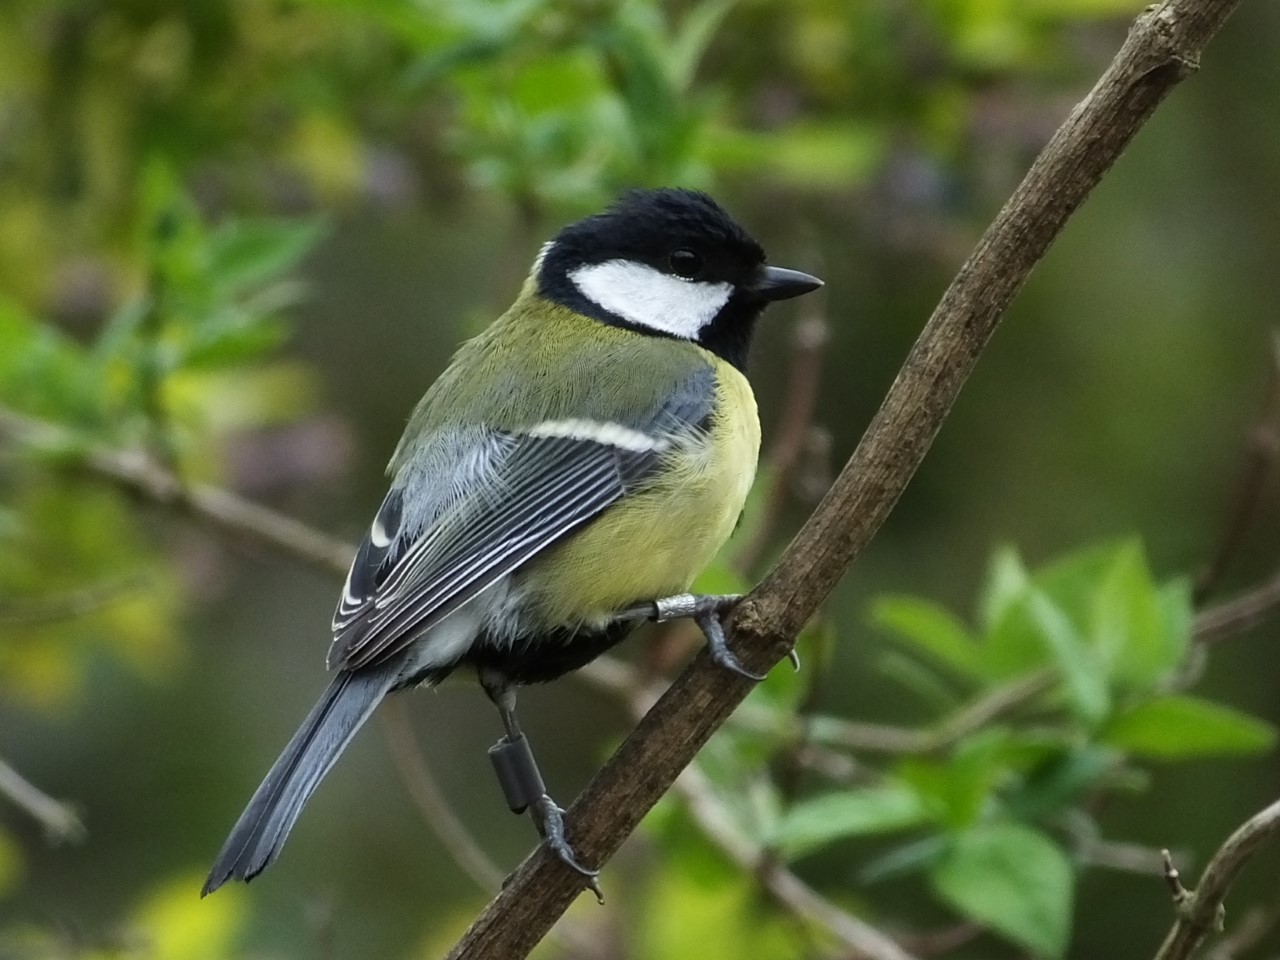 Great Tit perched on branch